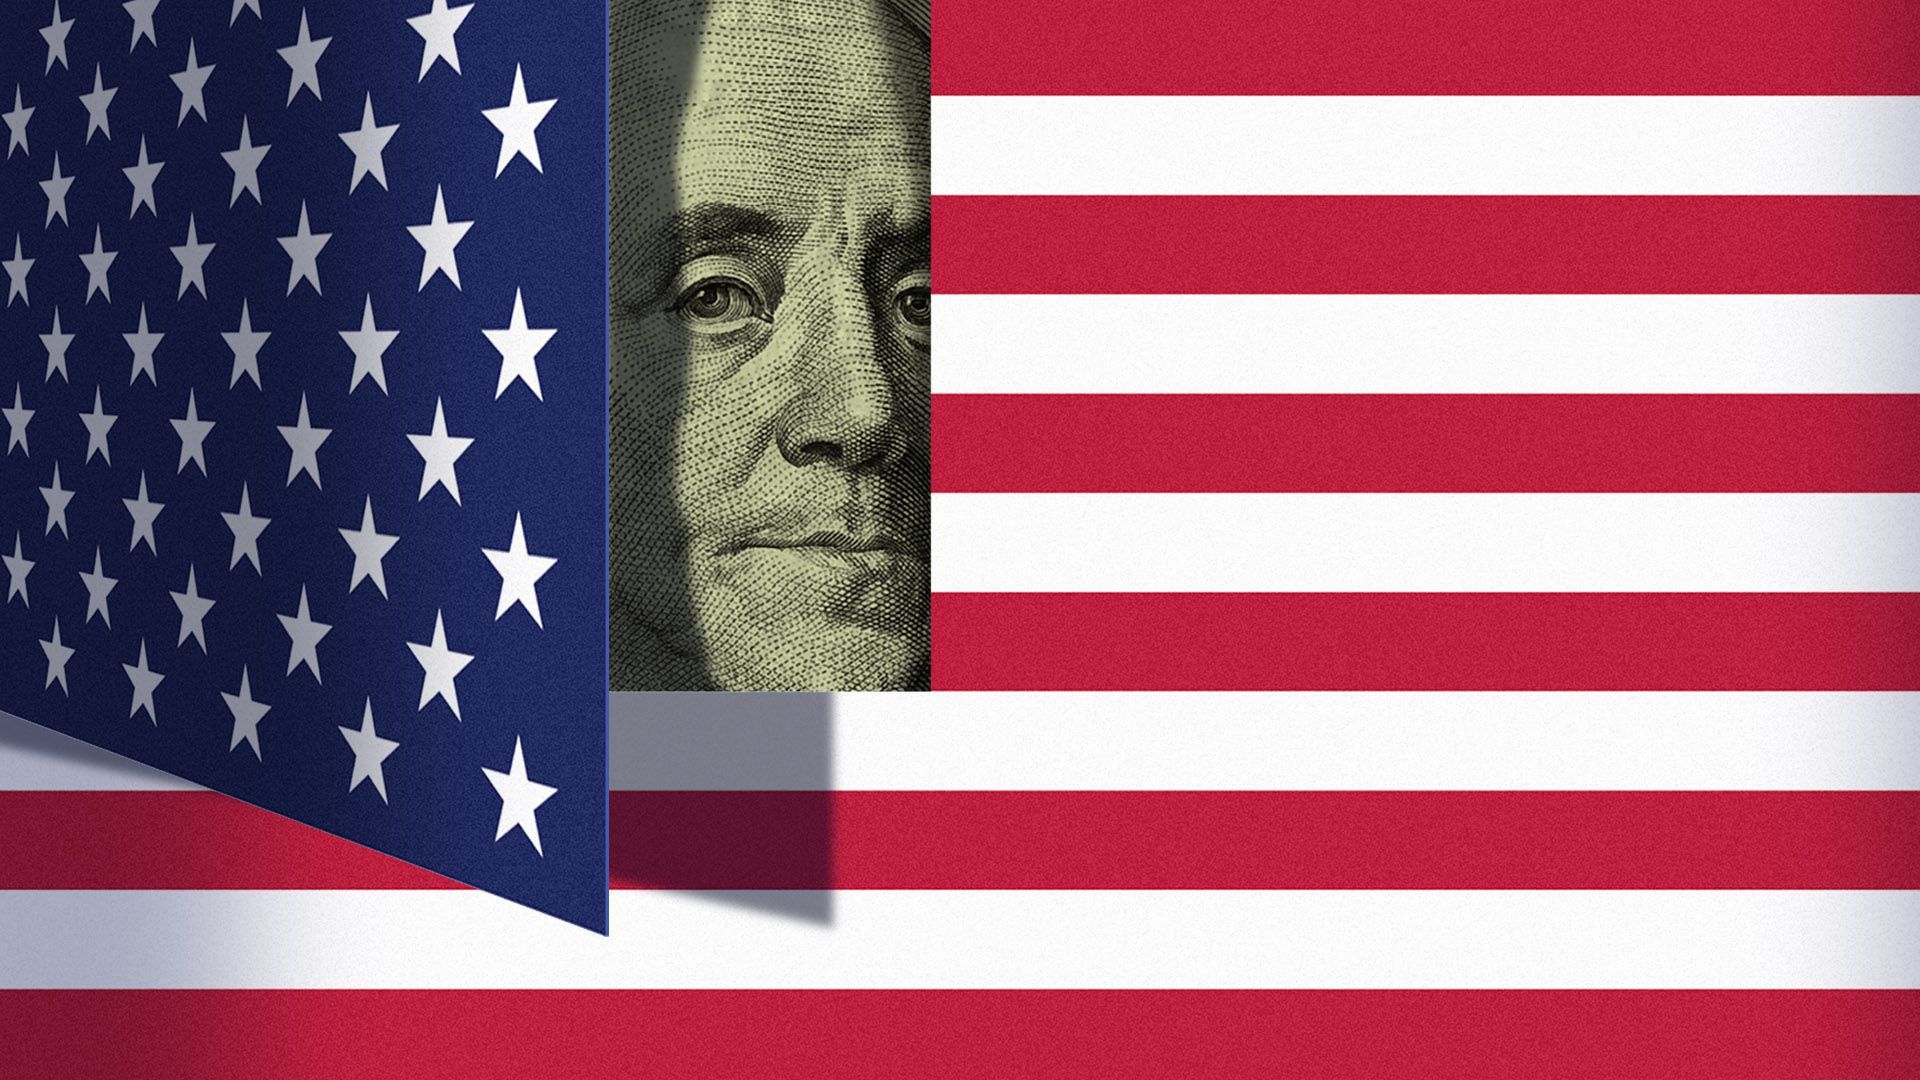 An illustration shows American money behind an opening American flag.